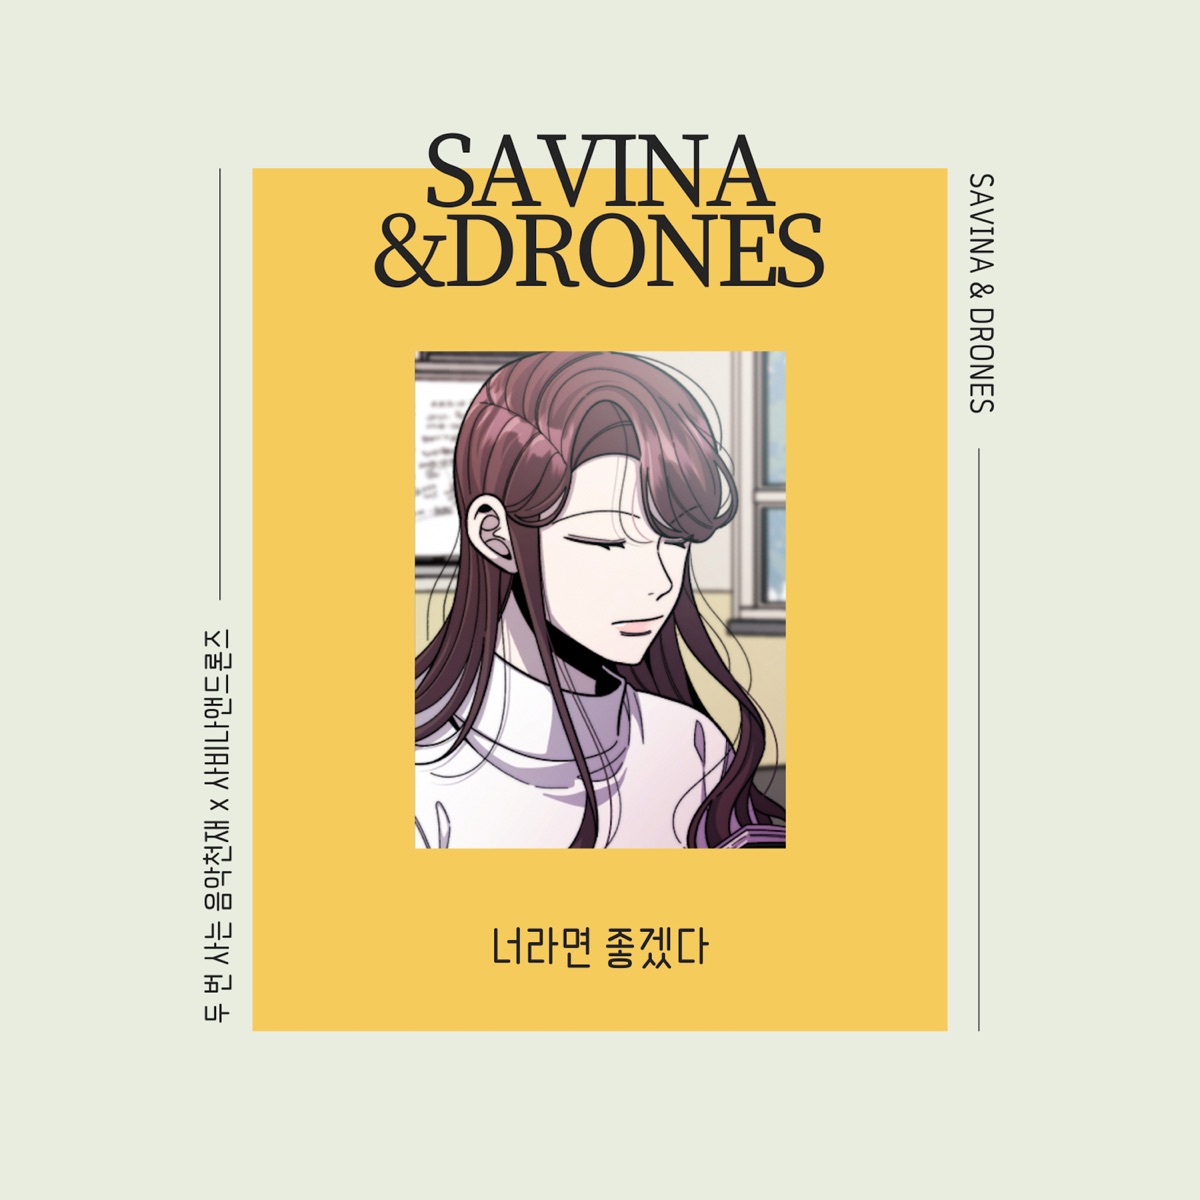 Savina & Drones – We loved each other so much – Single